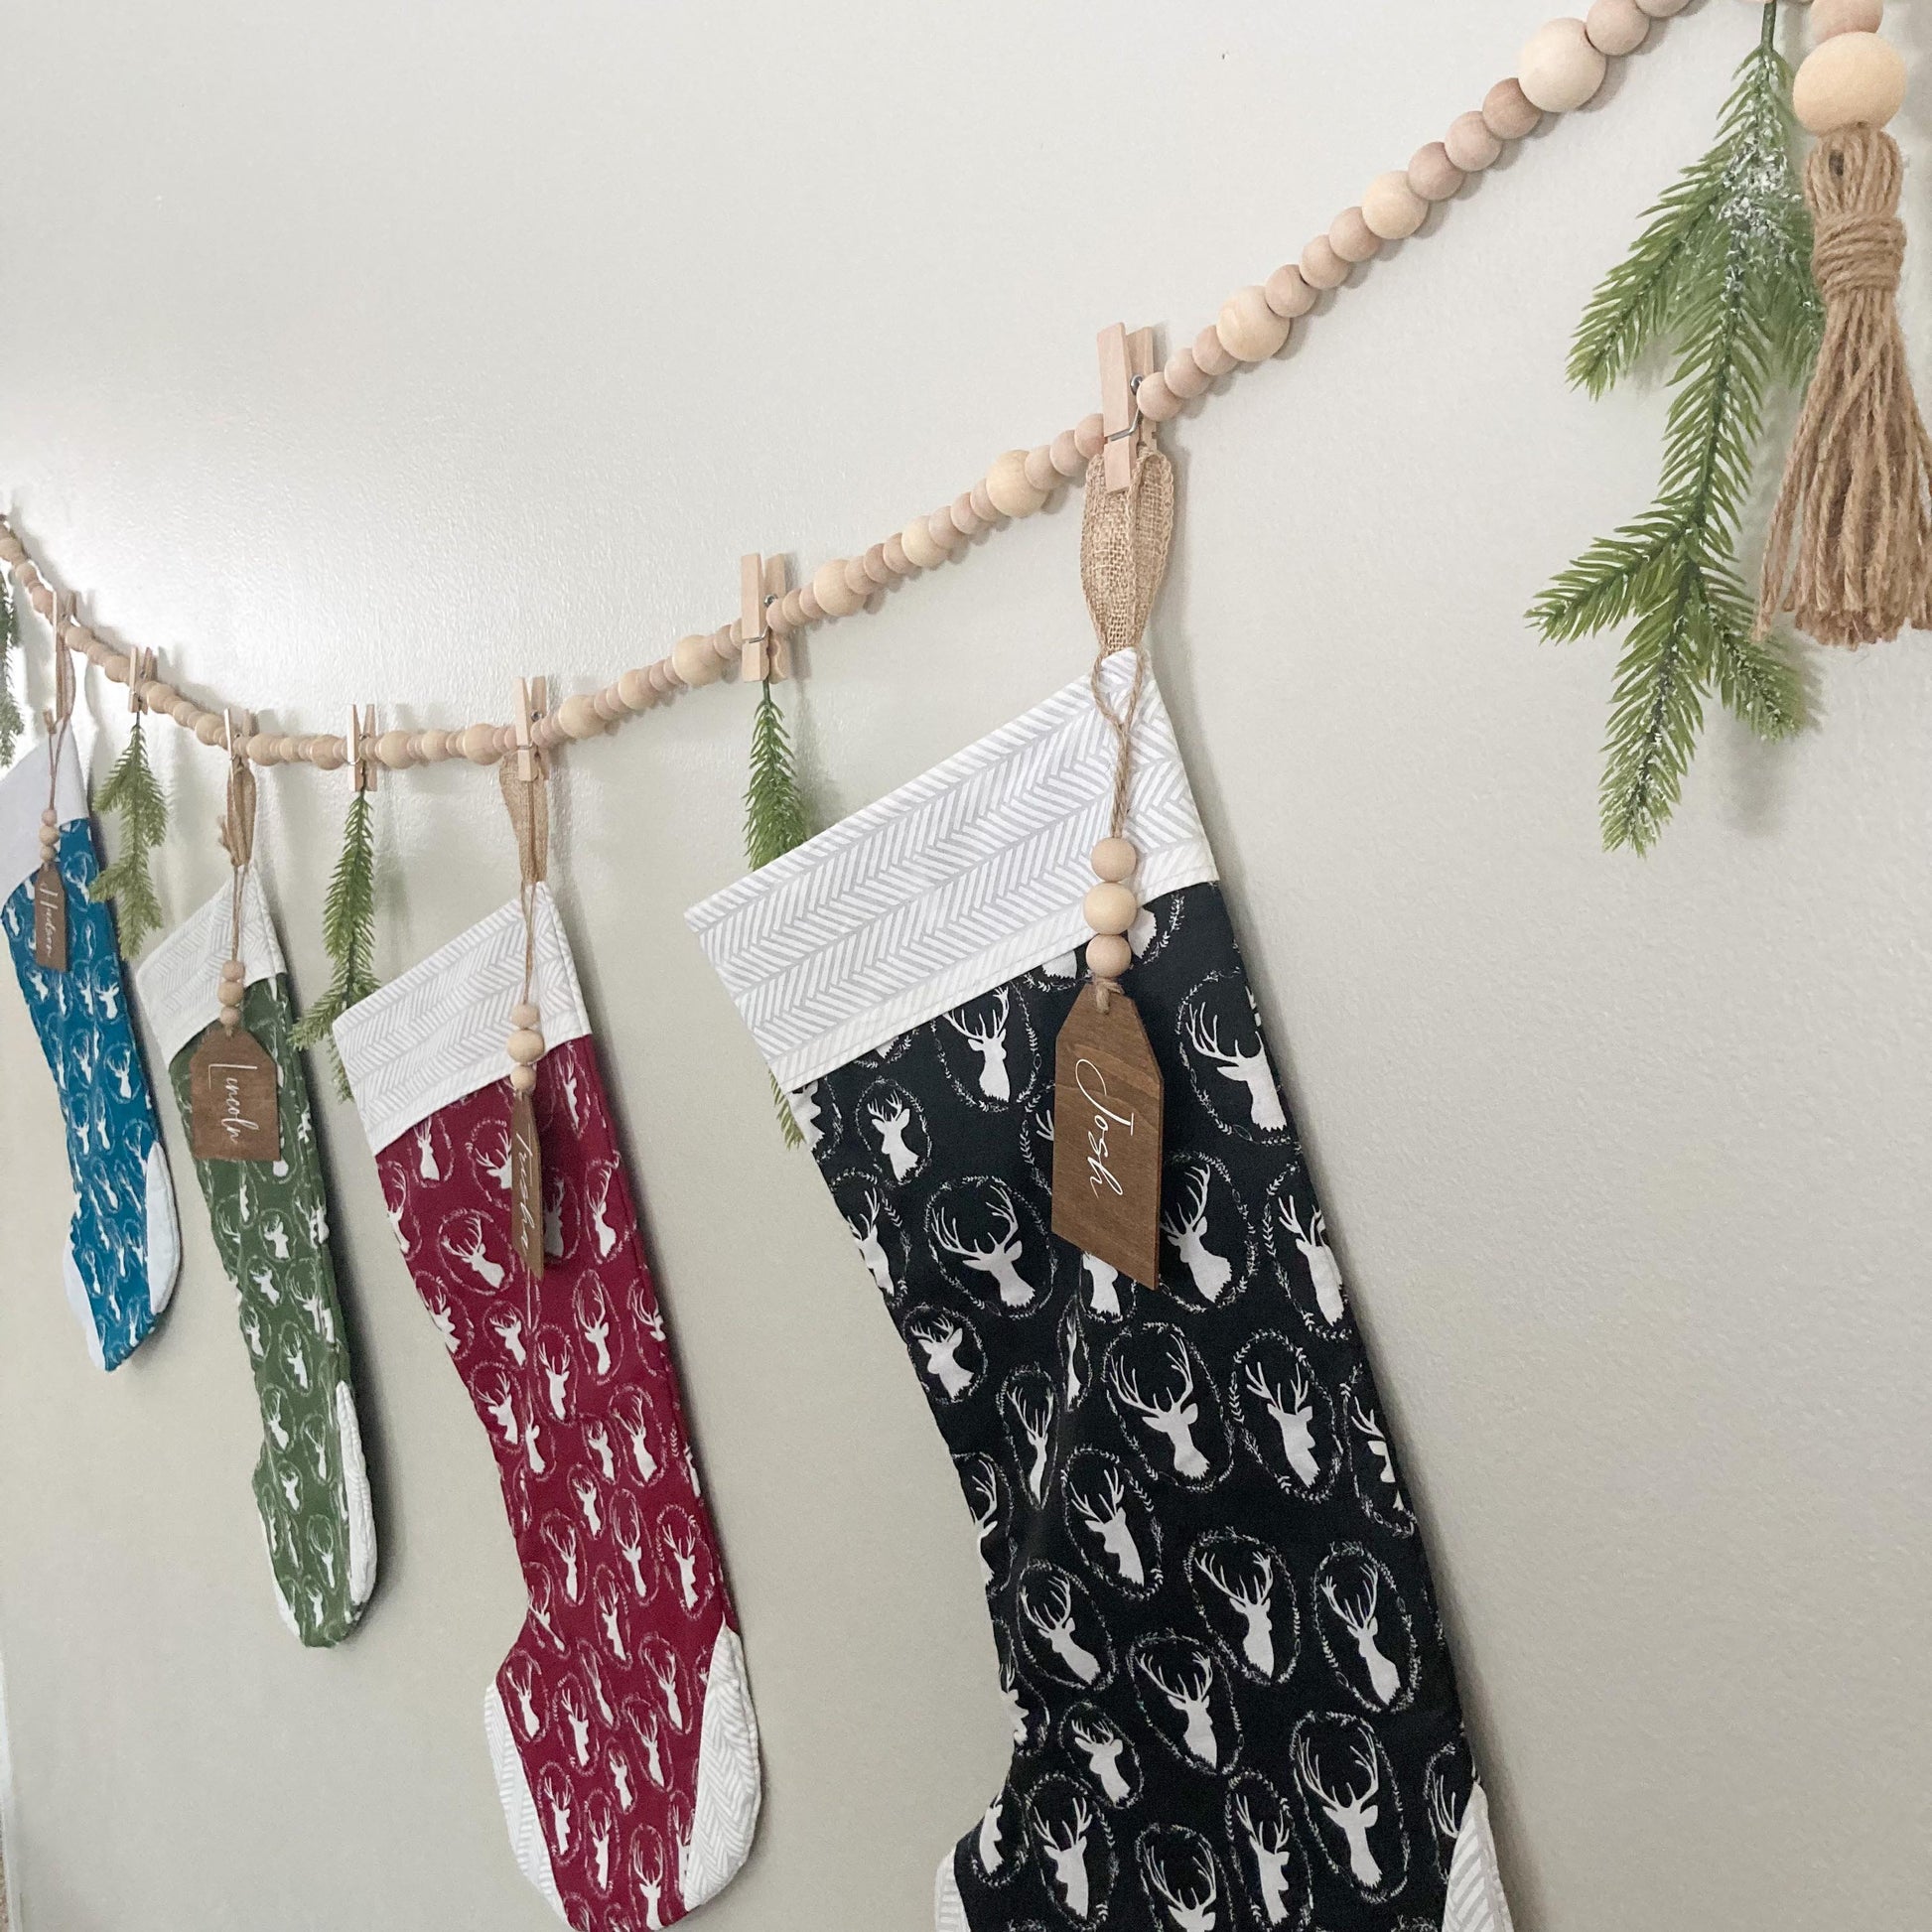 Handmade Wood bead garland display with jute twine tassels and 9 mini clothespins 6.5" total length hanging on wall displaying stockings